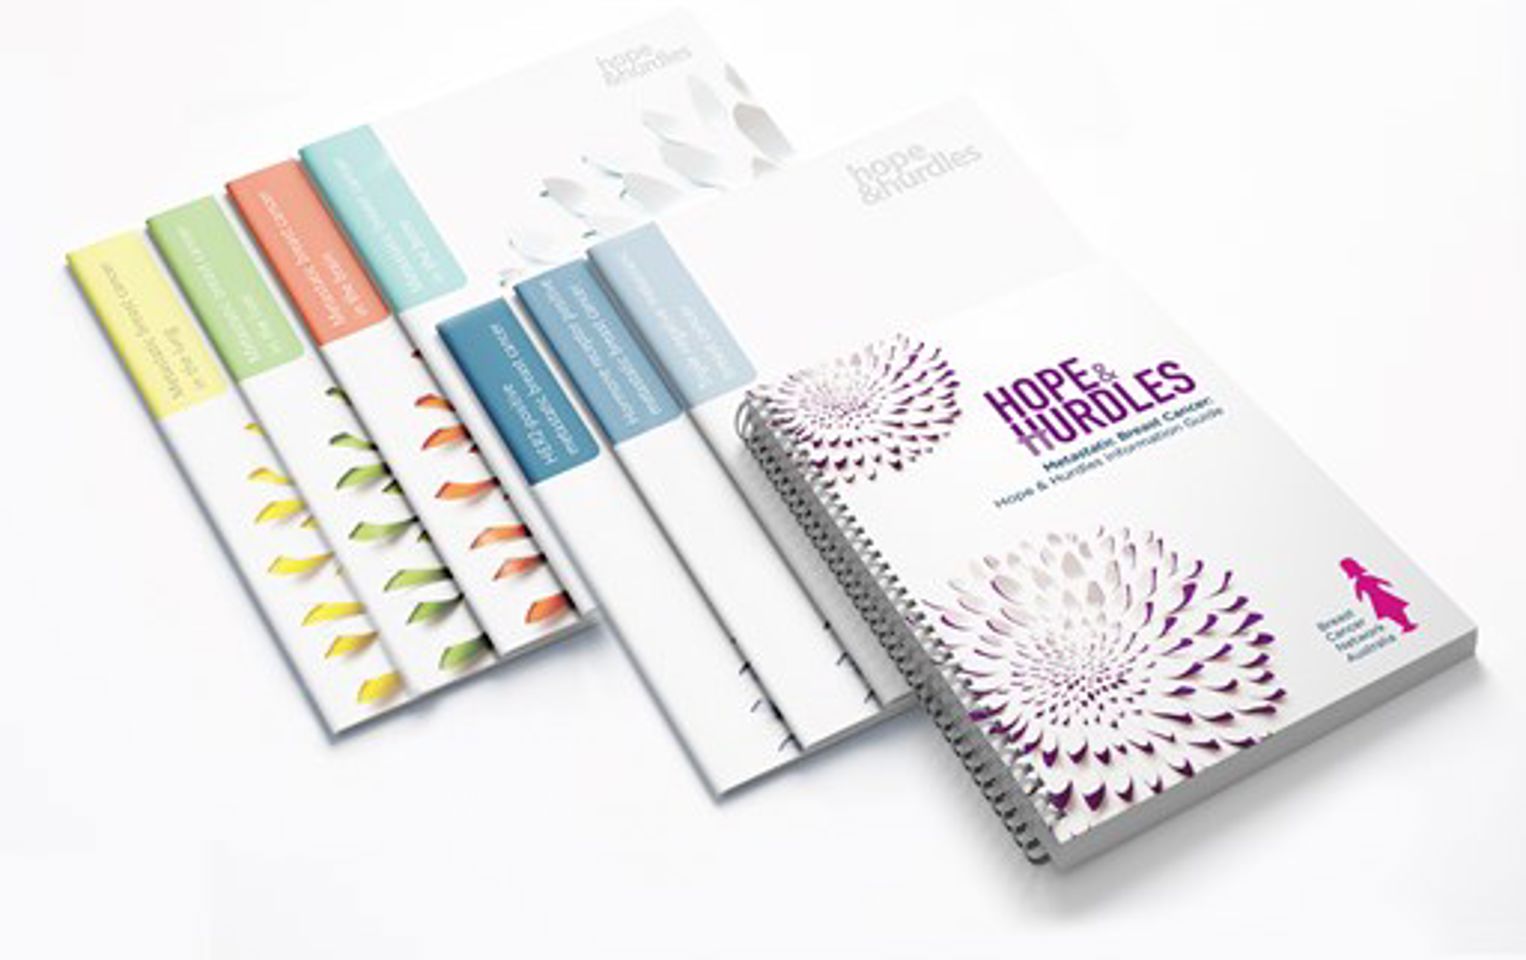 Image of booklets